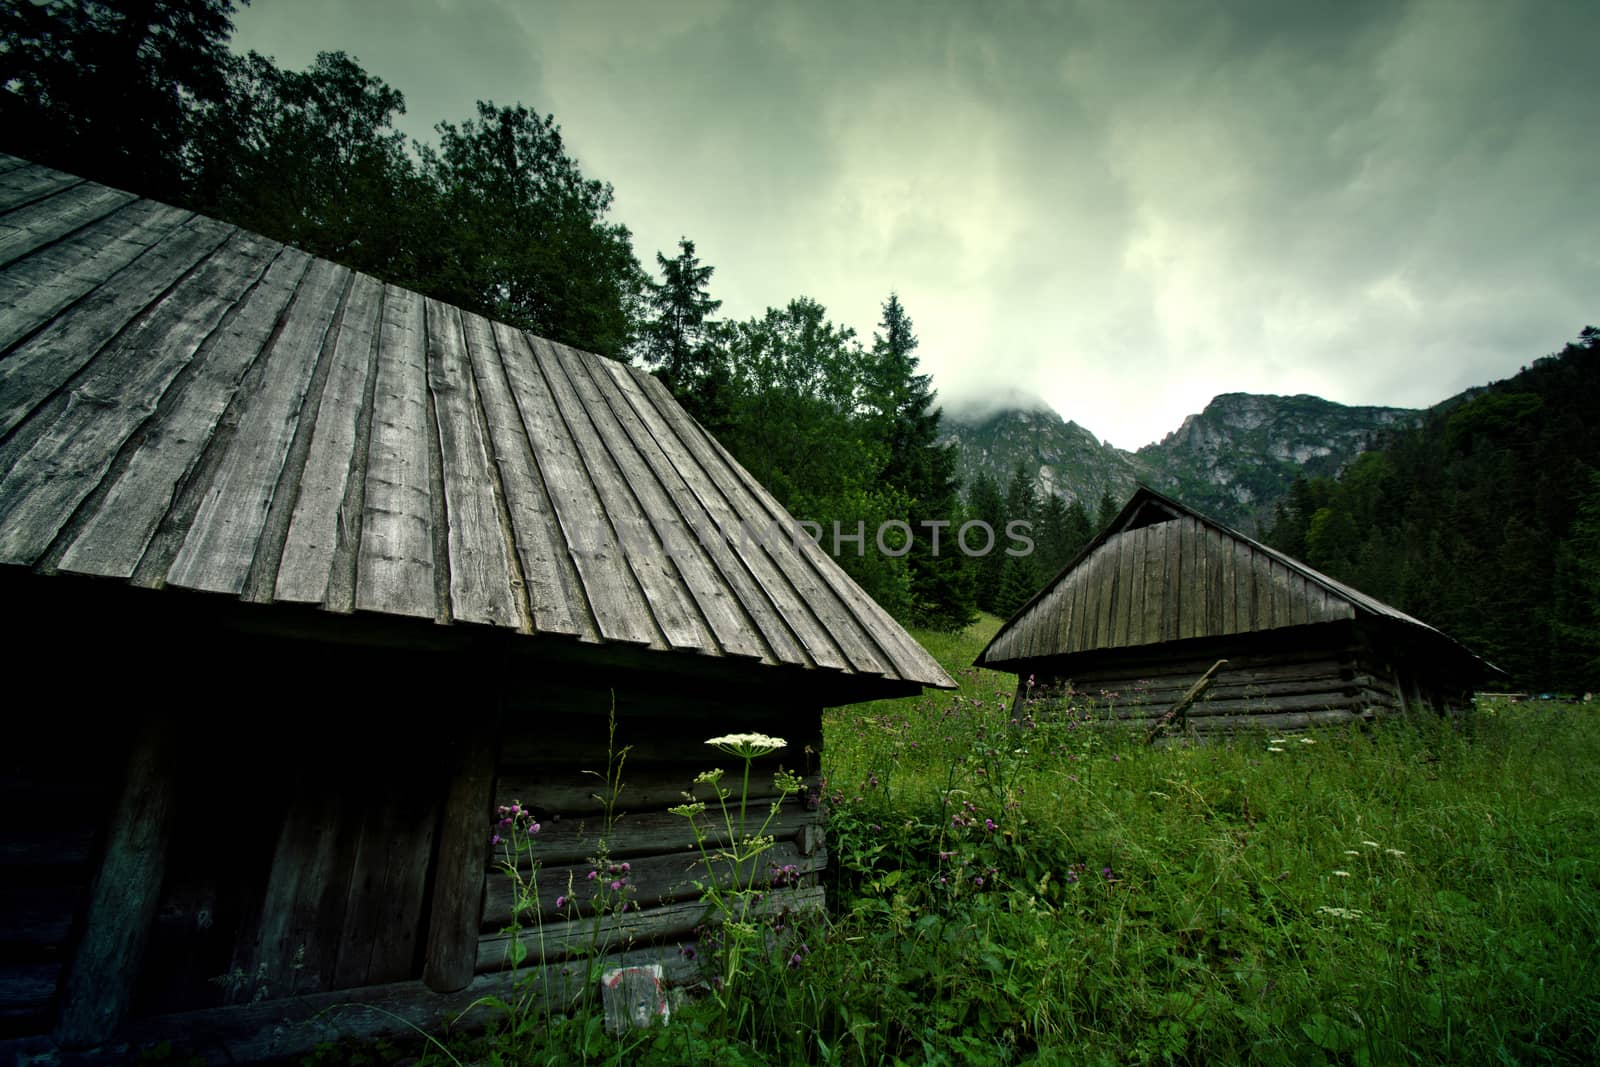 Mountains Landscape. Small wooden house. Nature in wilderness.